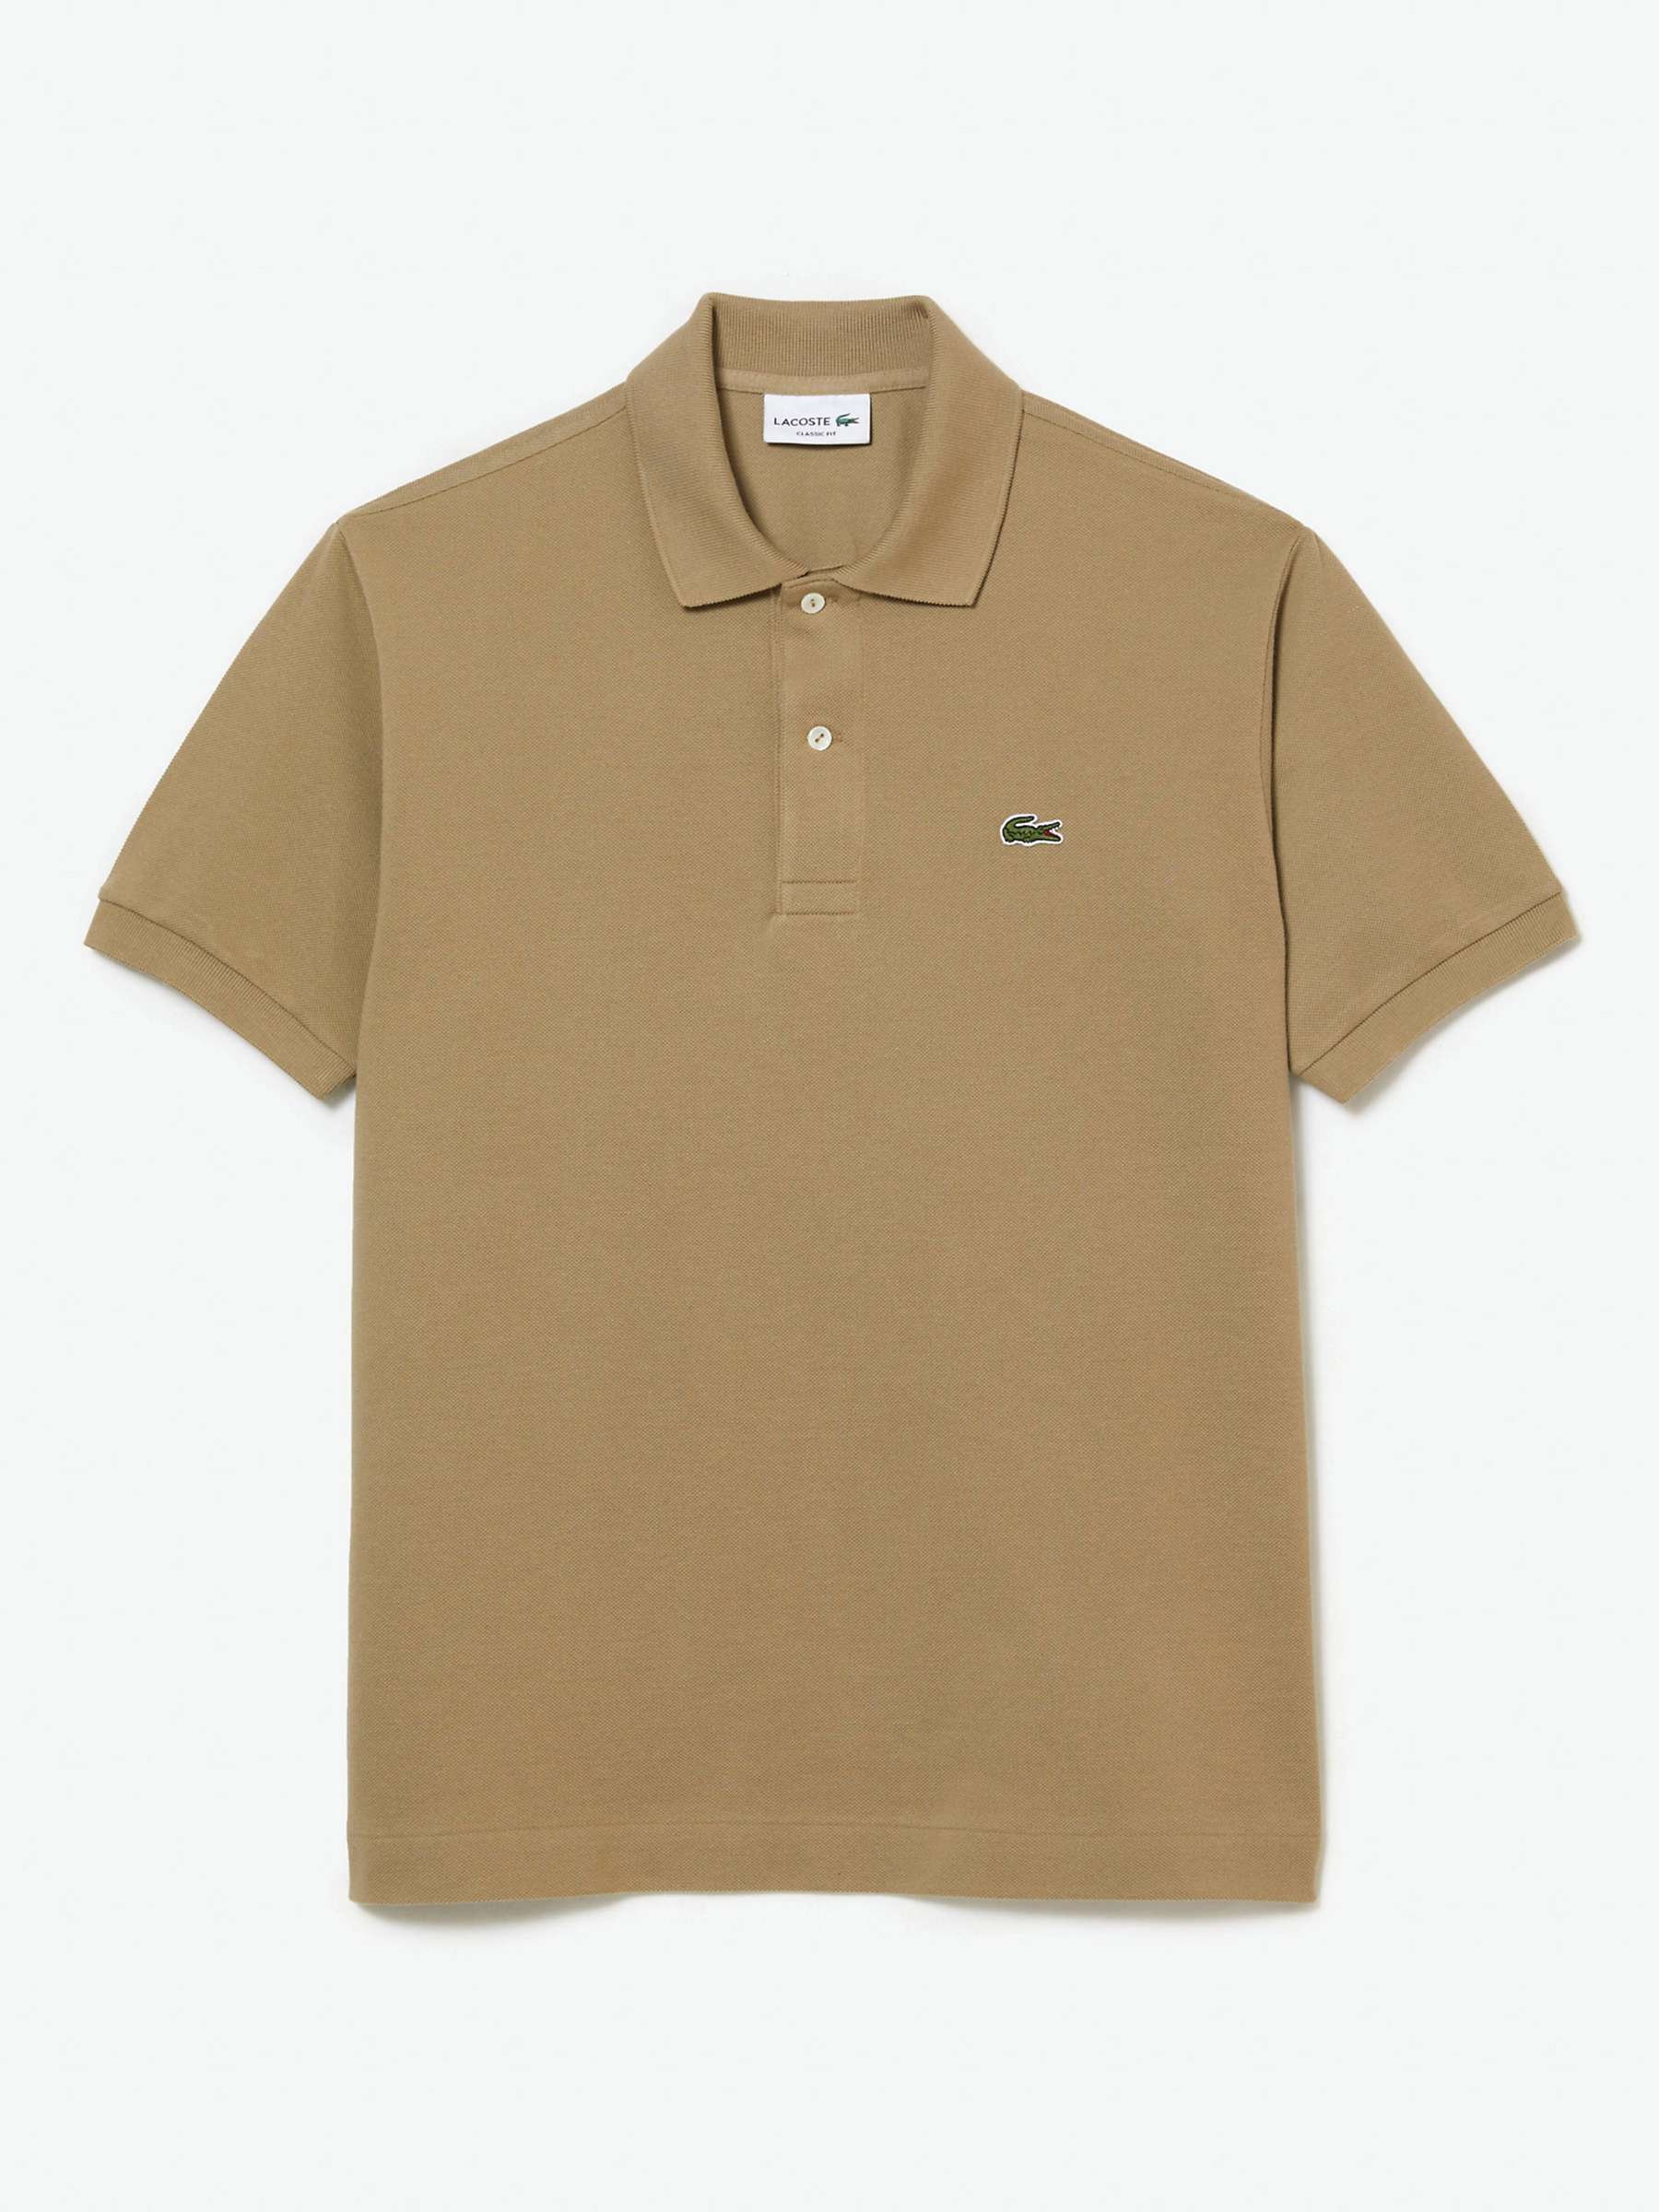 Buy Lacoste L.12.12 Classic Regular Fit Short Sleeve Polo Shirt Online at johnlewis.com